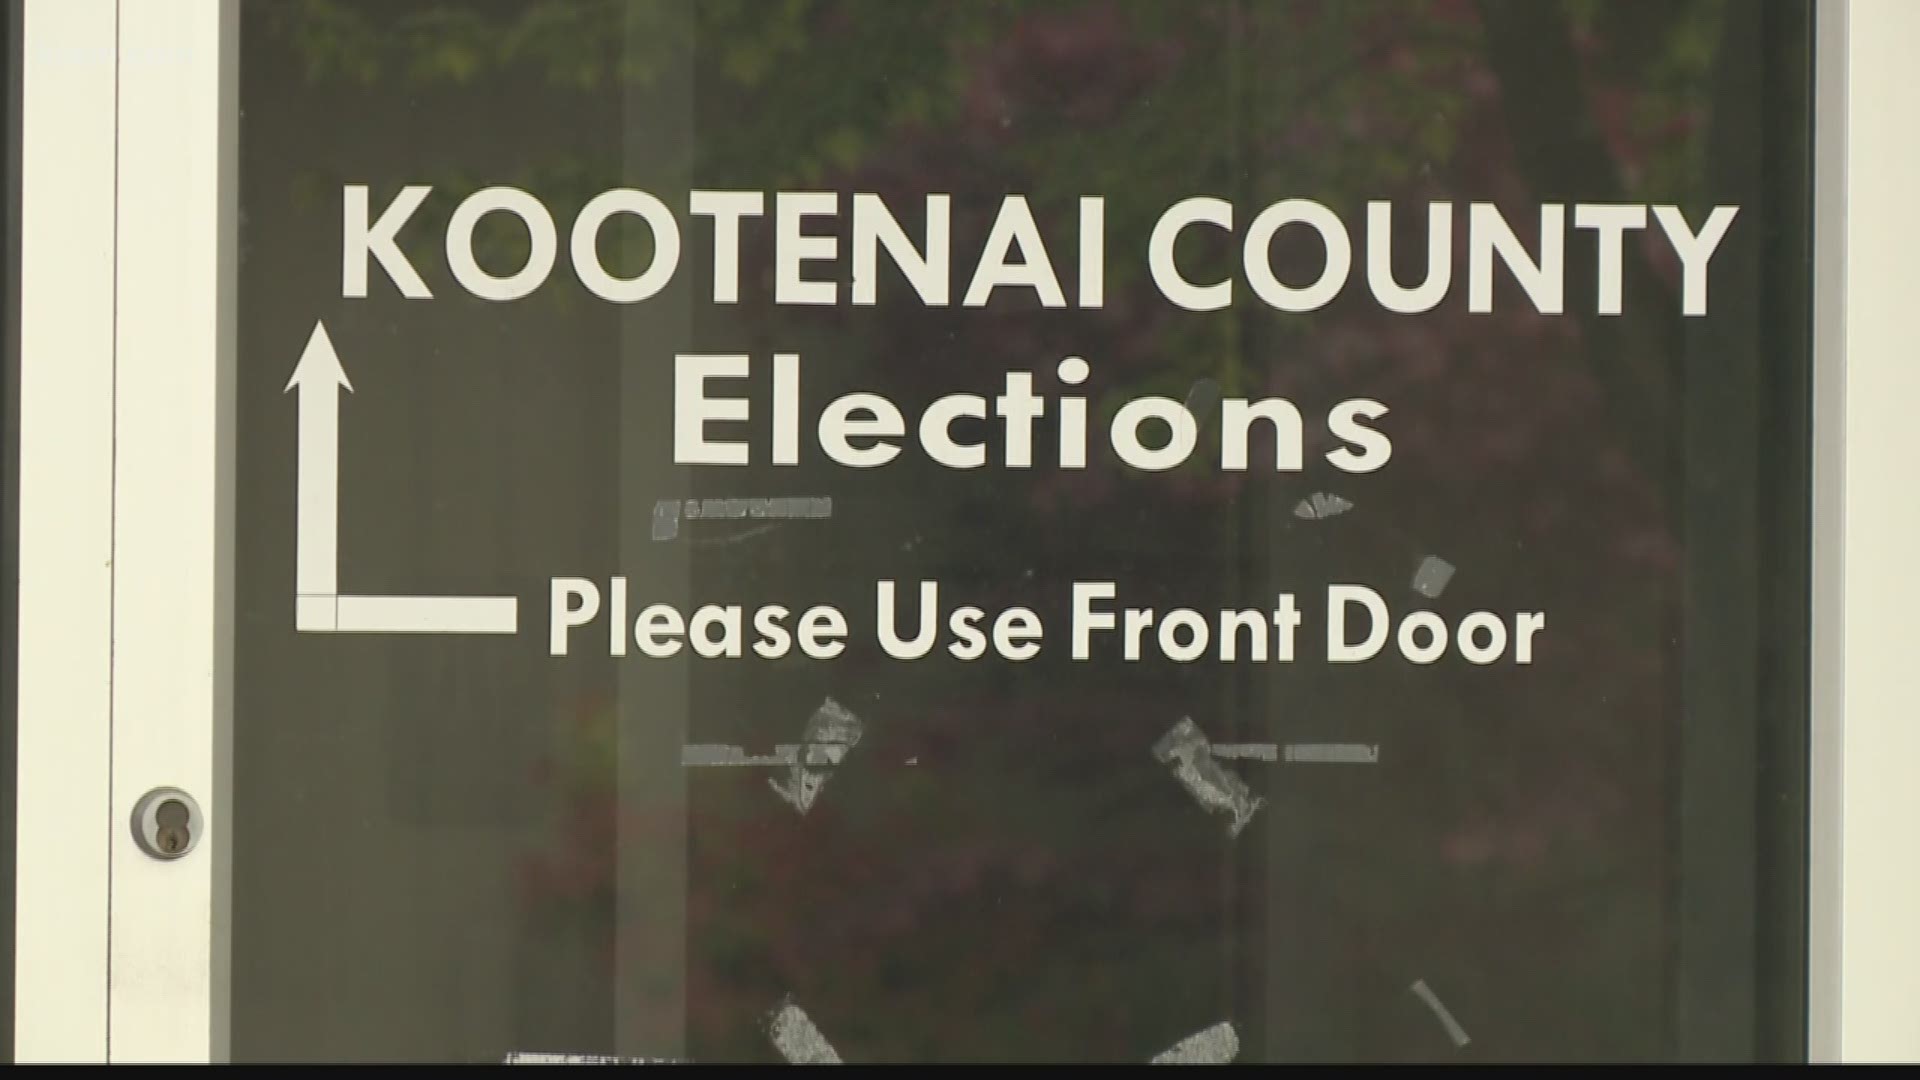 As of earlier this week, the number of completed absentee ballots that had been returned to the county had eclipsed 12,000.